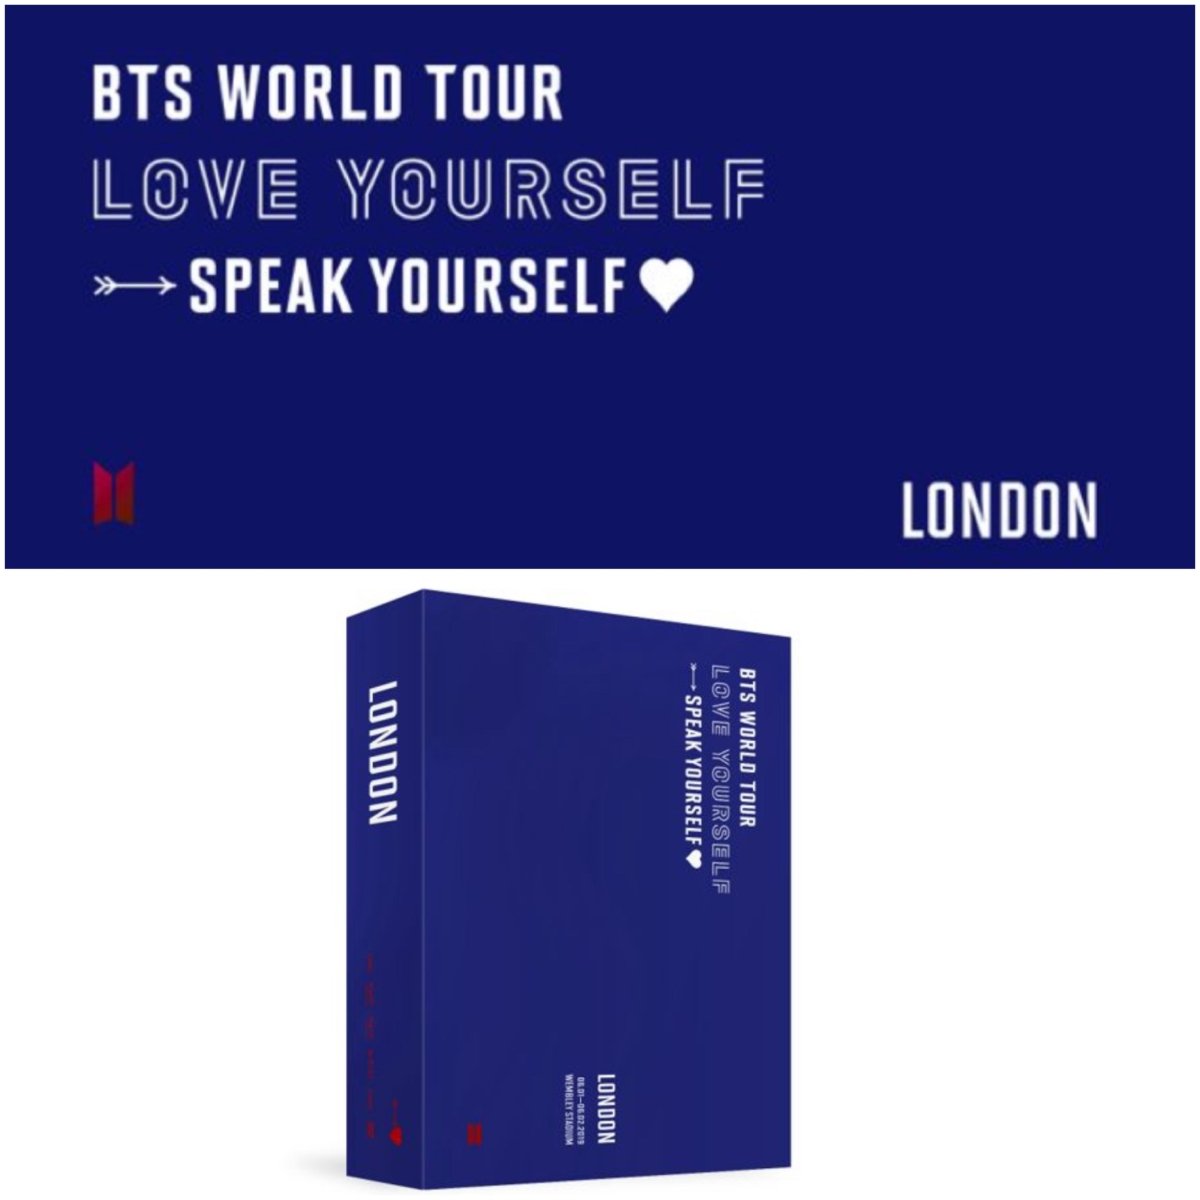 BTS World Tour LOVE YOURSELF: SPEAK YOURSELF in LONDON DVD (Free Shipping)